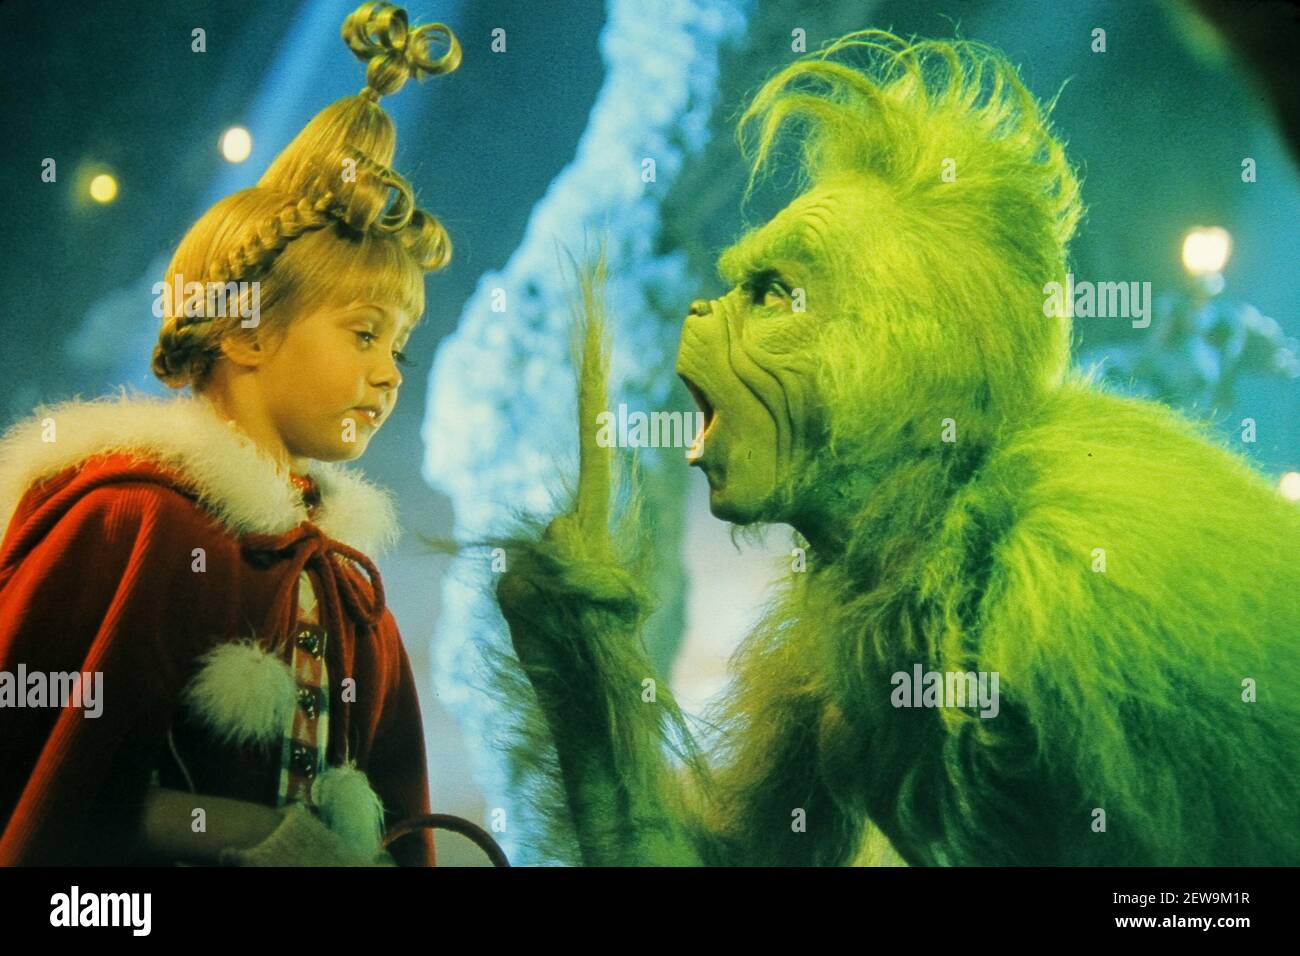 Jim Carrey, Taylor Momsen, 'D.r. Seuss 'come il Grinch Stole Natale' (2000) universale. Photo Credit: Ron Batzdorff/ Universal /The Hollywood Archive - file Reference N. 34082-653THA Foto Stock